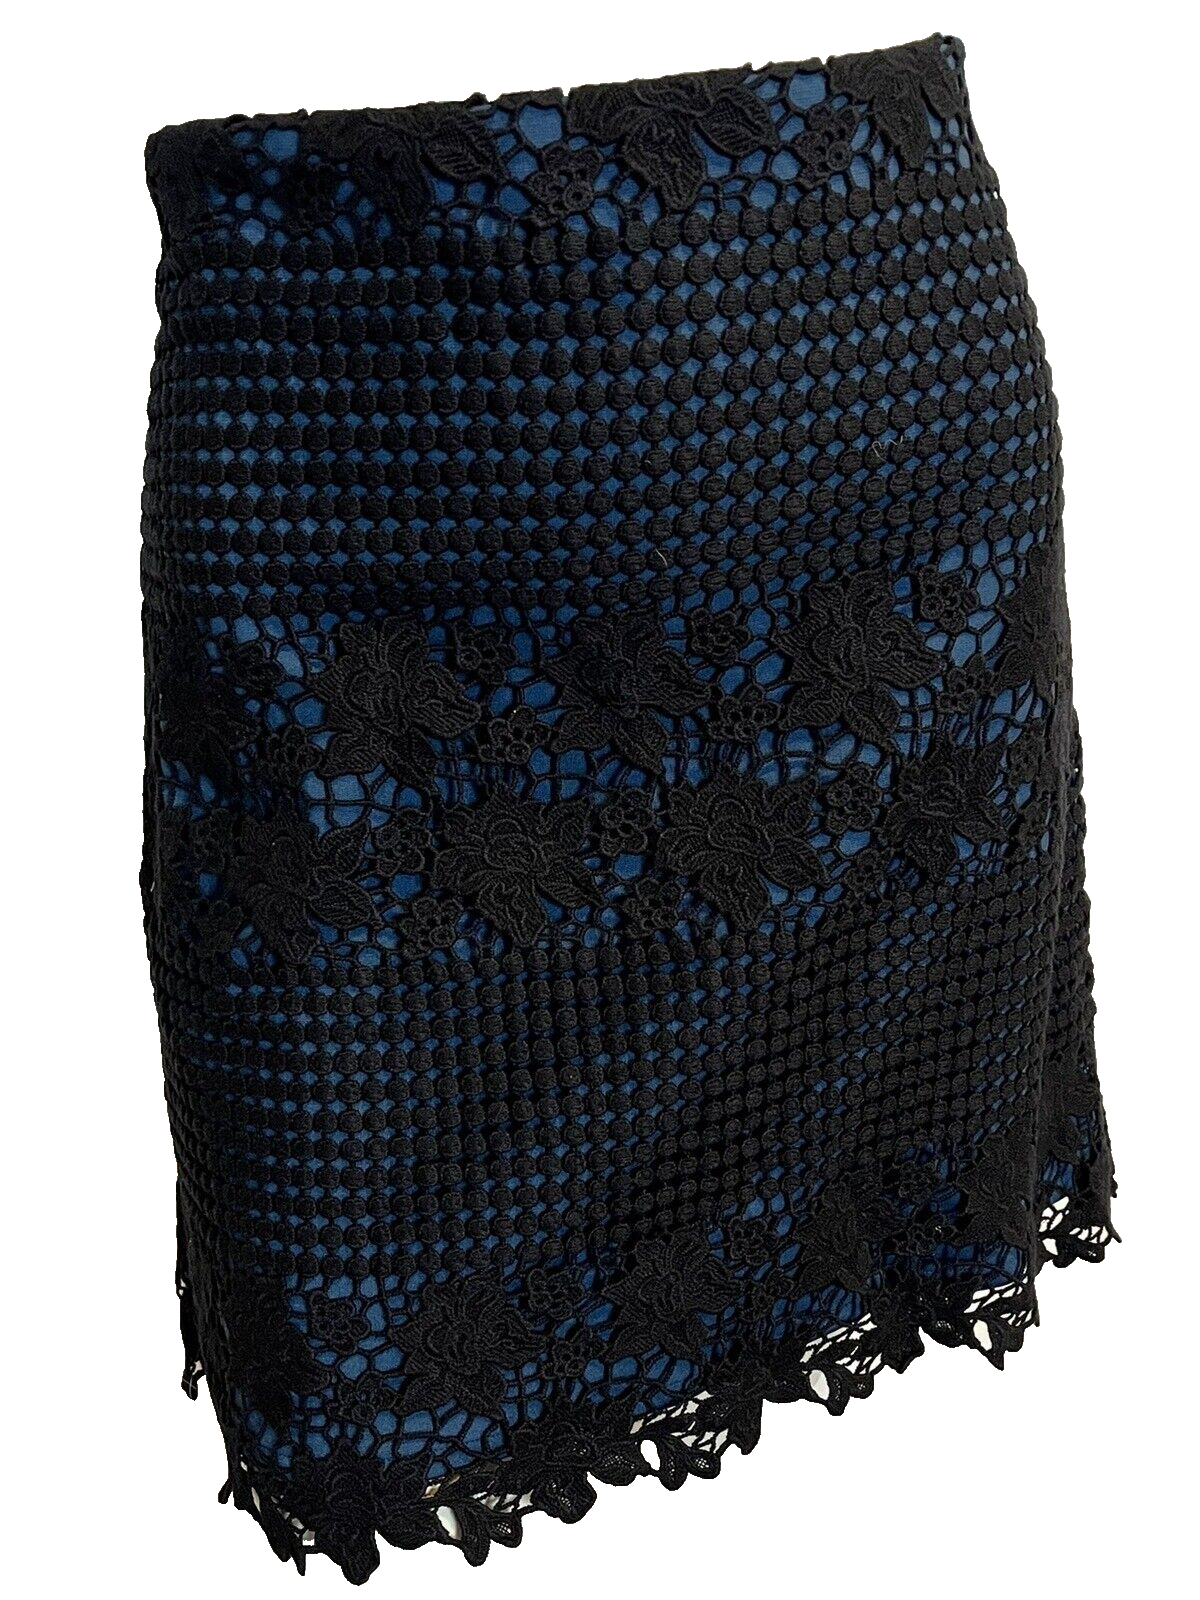 Primary image for Ann Taylor Loft Blue Skirt with Black Lace Overlay Pencil Skirt Size 10